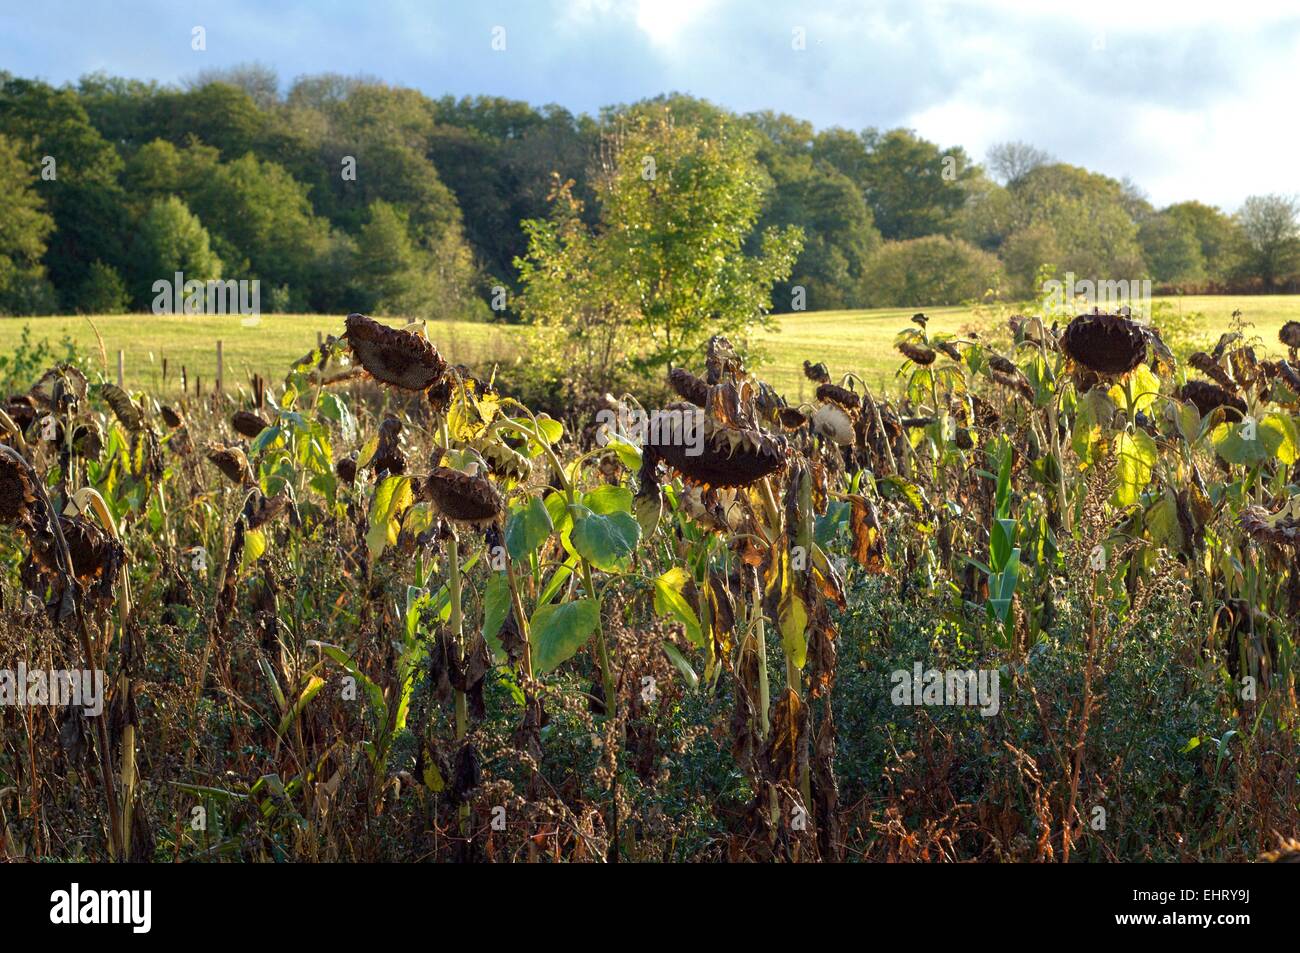 Dead sunflowers in a field in the United Kingdom in Autumn Stock Photo